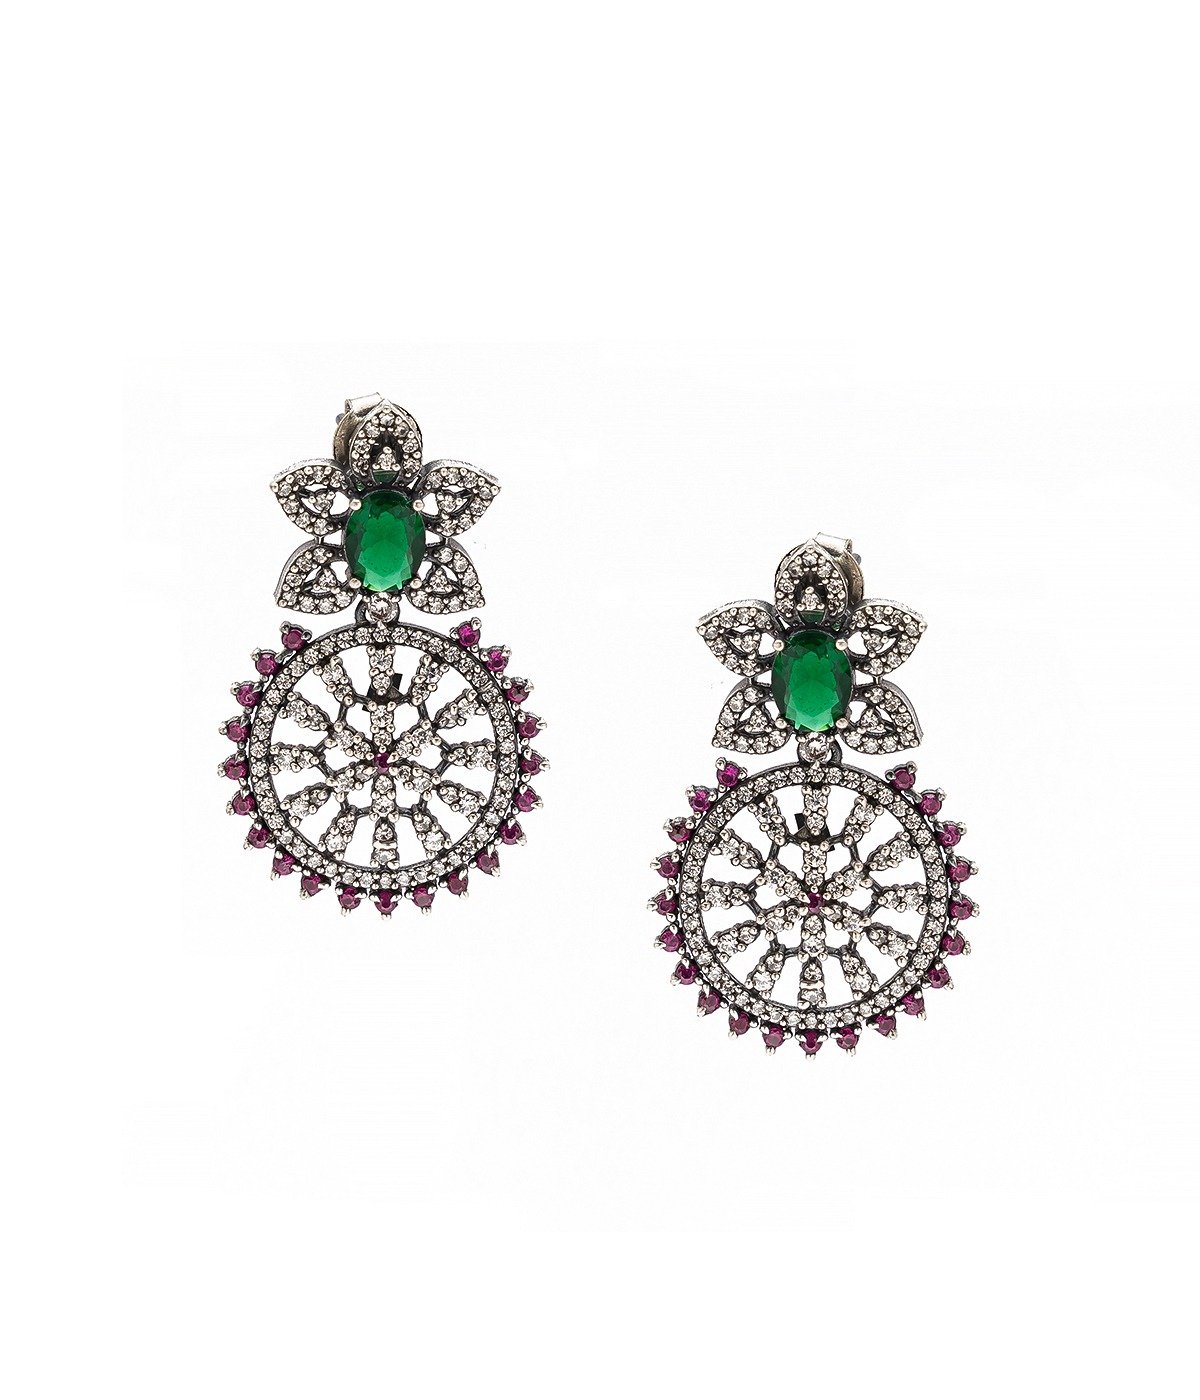 OXIDISED SILVER STONE STUDDED ROUND EARRINGS FOR GIRLS